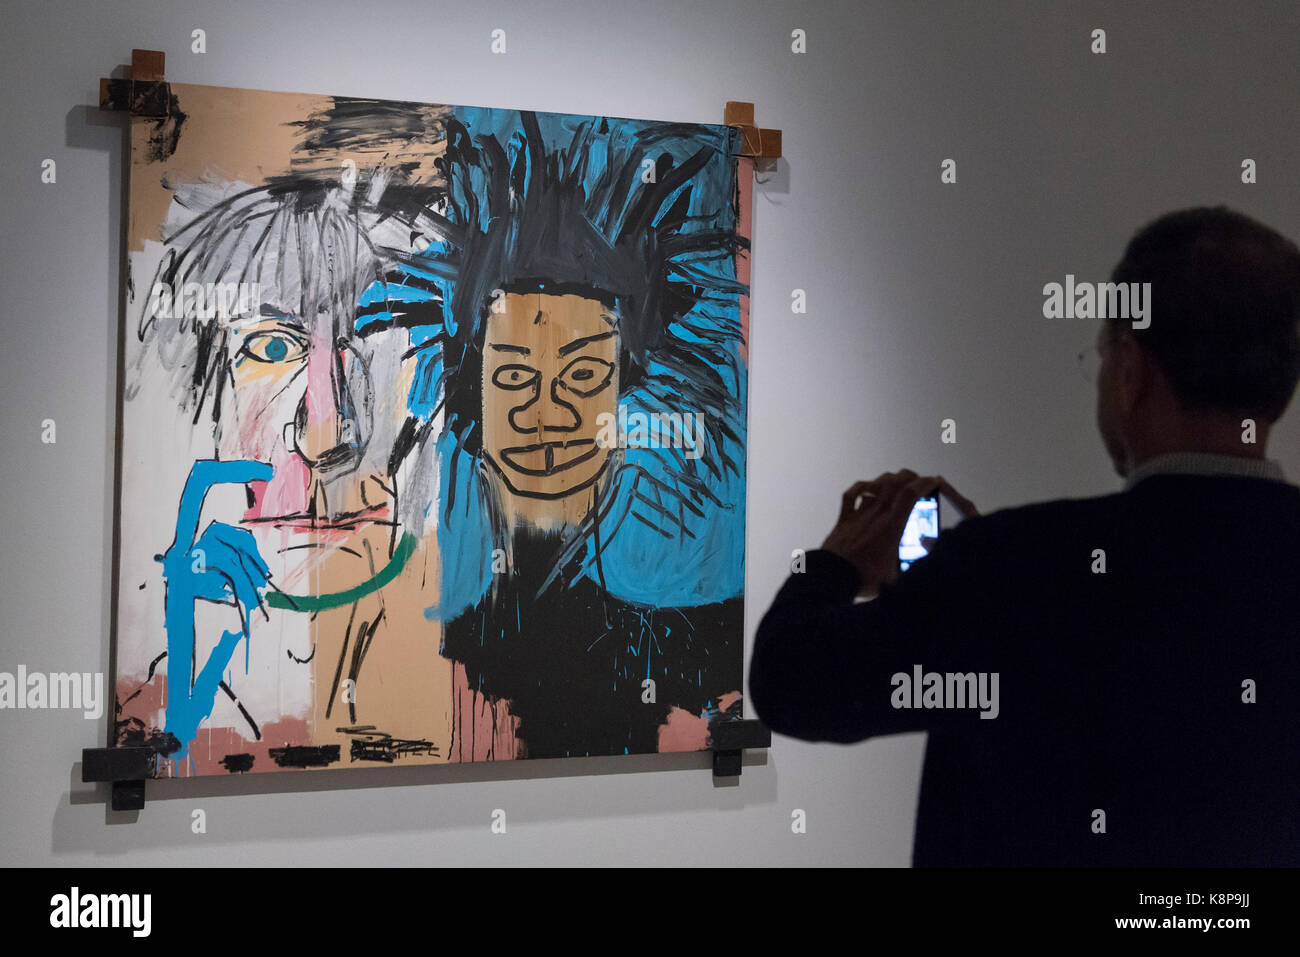 London, UK. 20 September 2017. A man views "Dos Cabezas", 1982, by Jean-Michel  Basquiat. Preview of "Basquiat: Boom for Real", the first large-scale  exhibition in the UK of the work of American